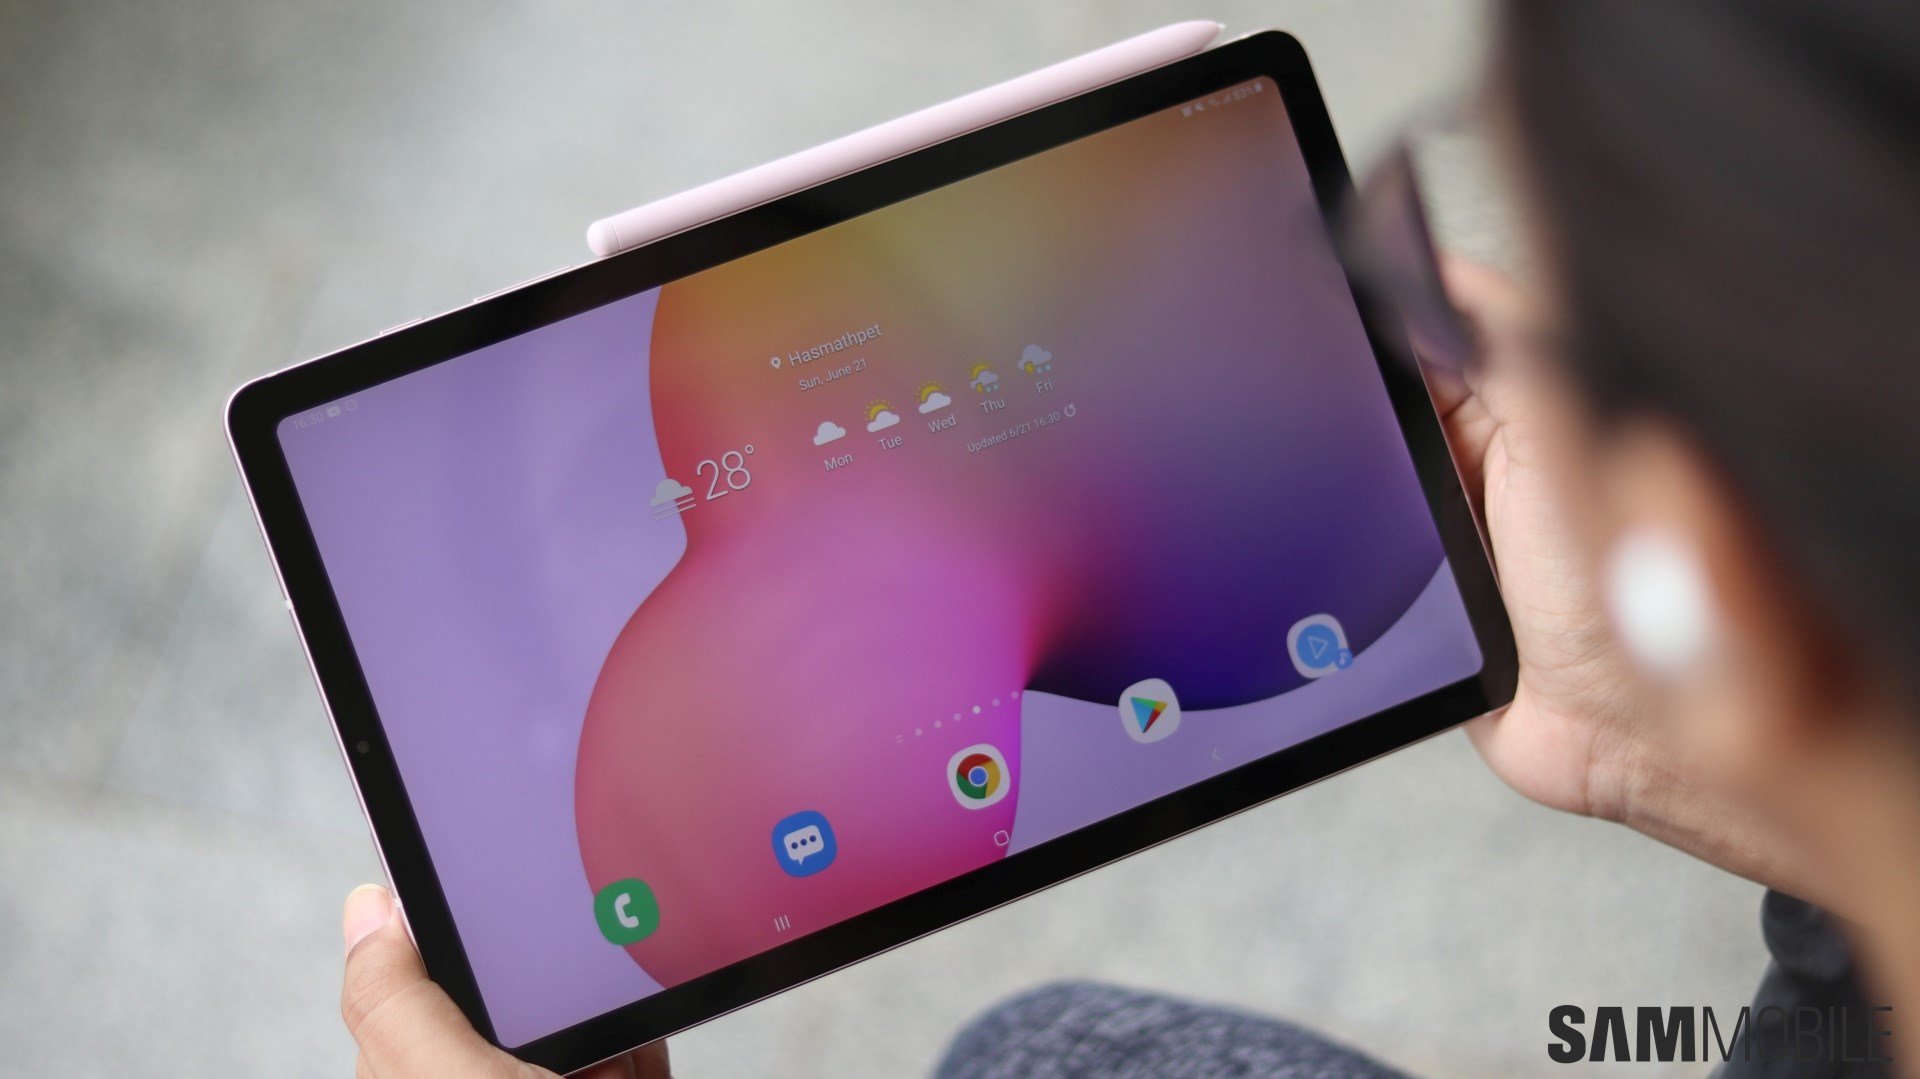 Samsung\'s now rolling out One UI 5.0 for the Galaxy Tab S6 Lite - SamMobile